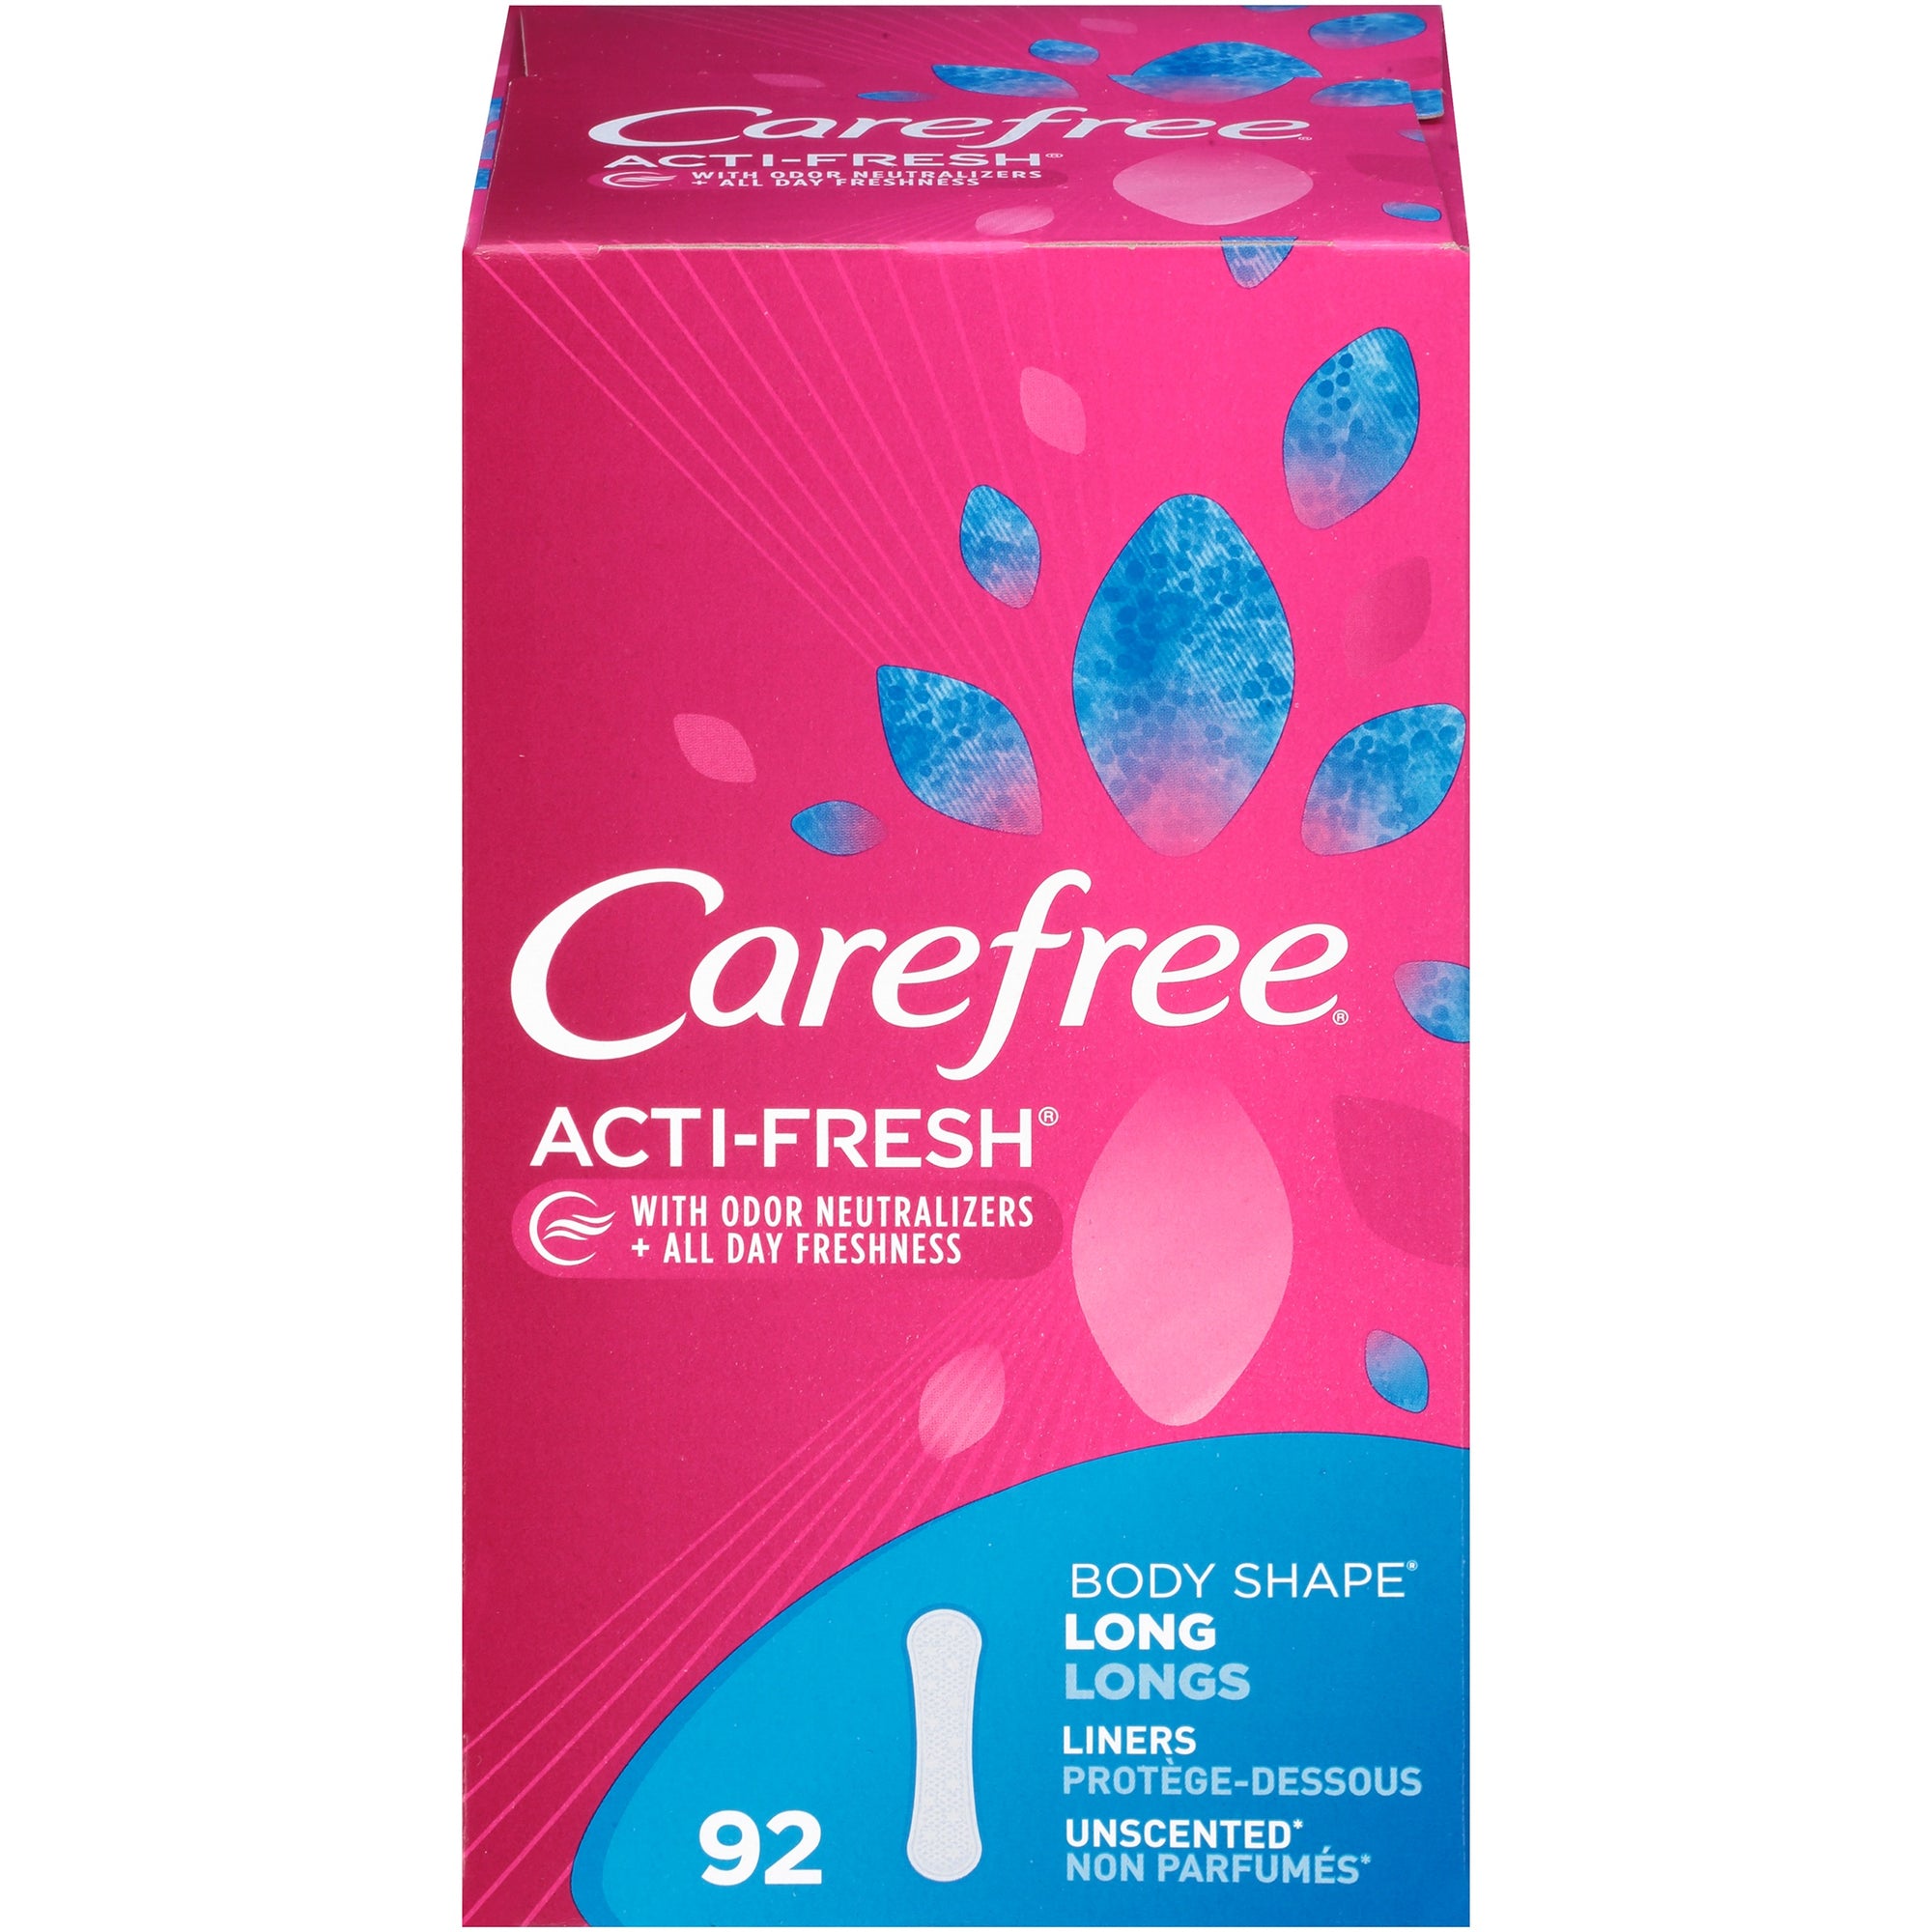 CAREFREE Liners Long 92 count